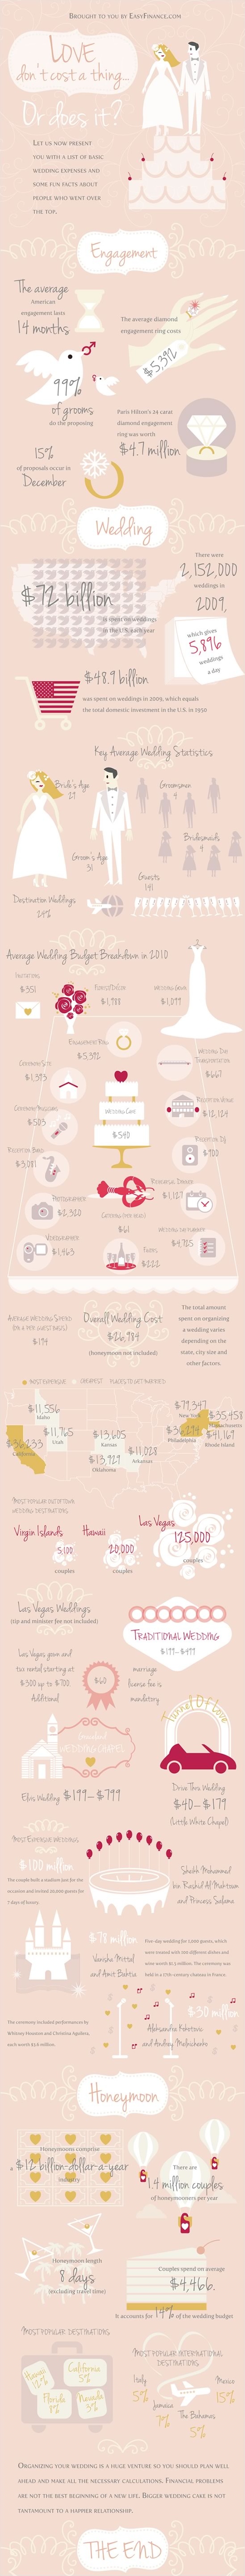 Average Cost Of Getting Married